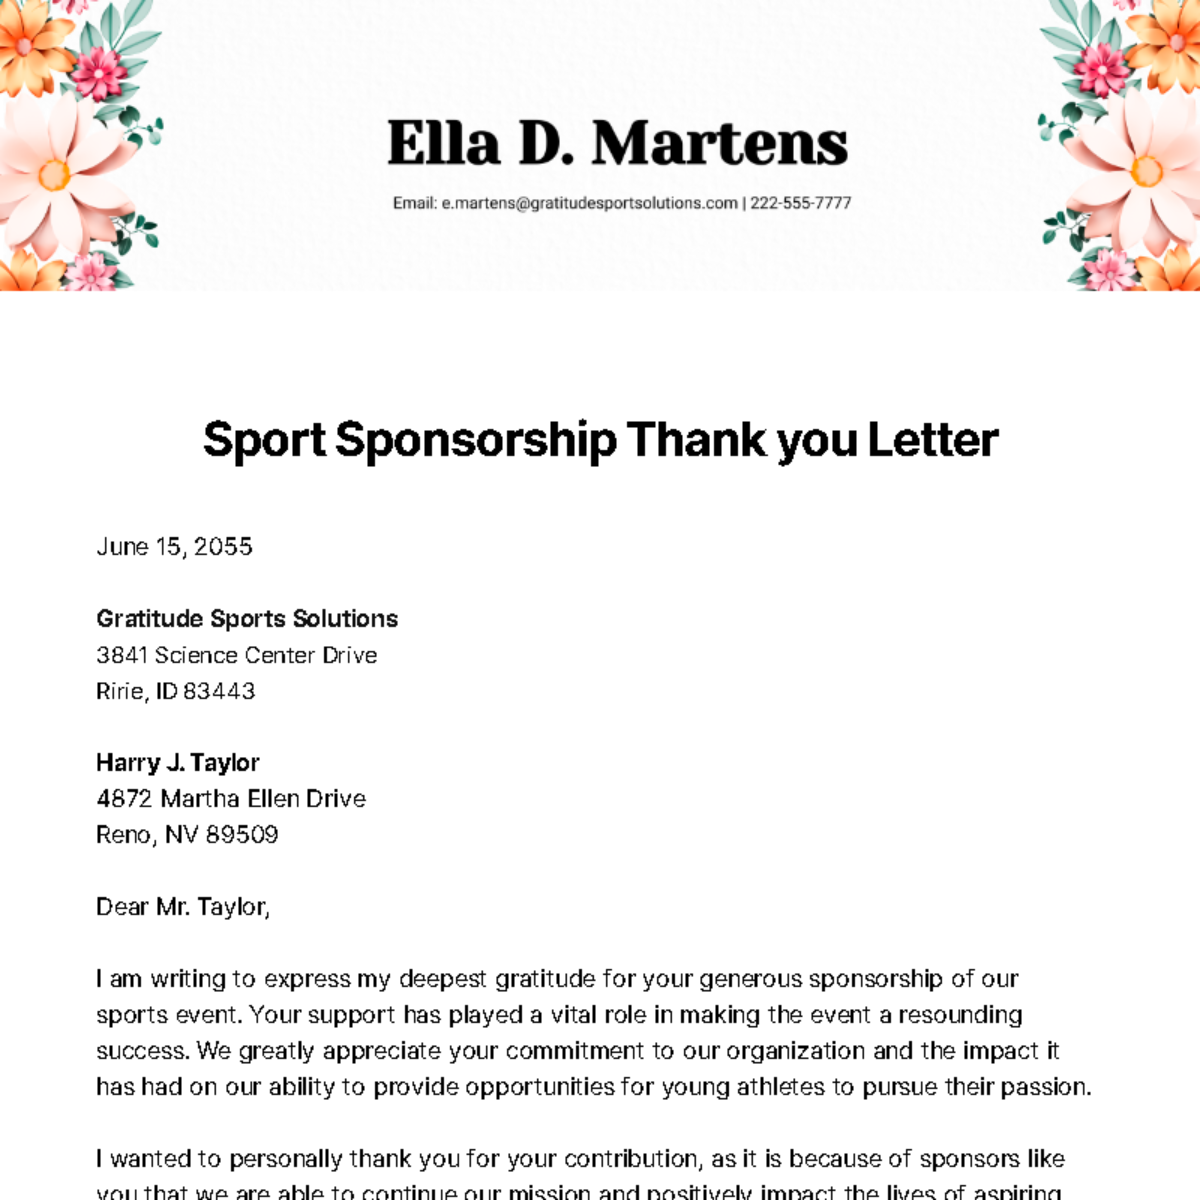 Sports Sponsorship Thank you Letter   Template